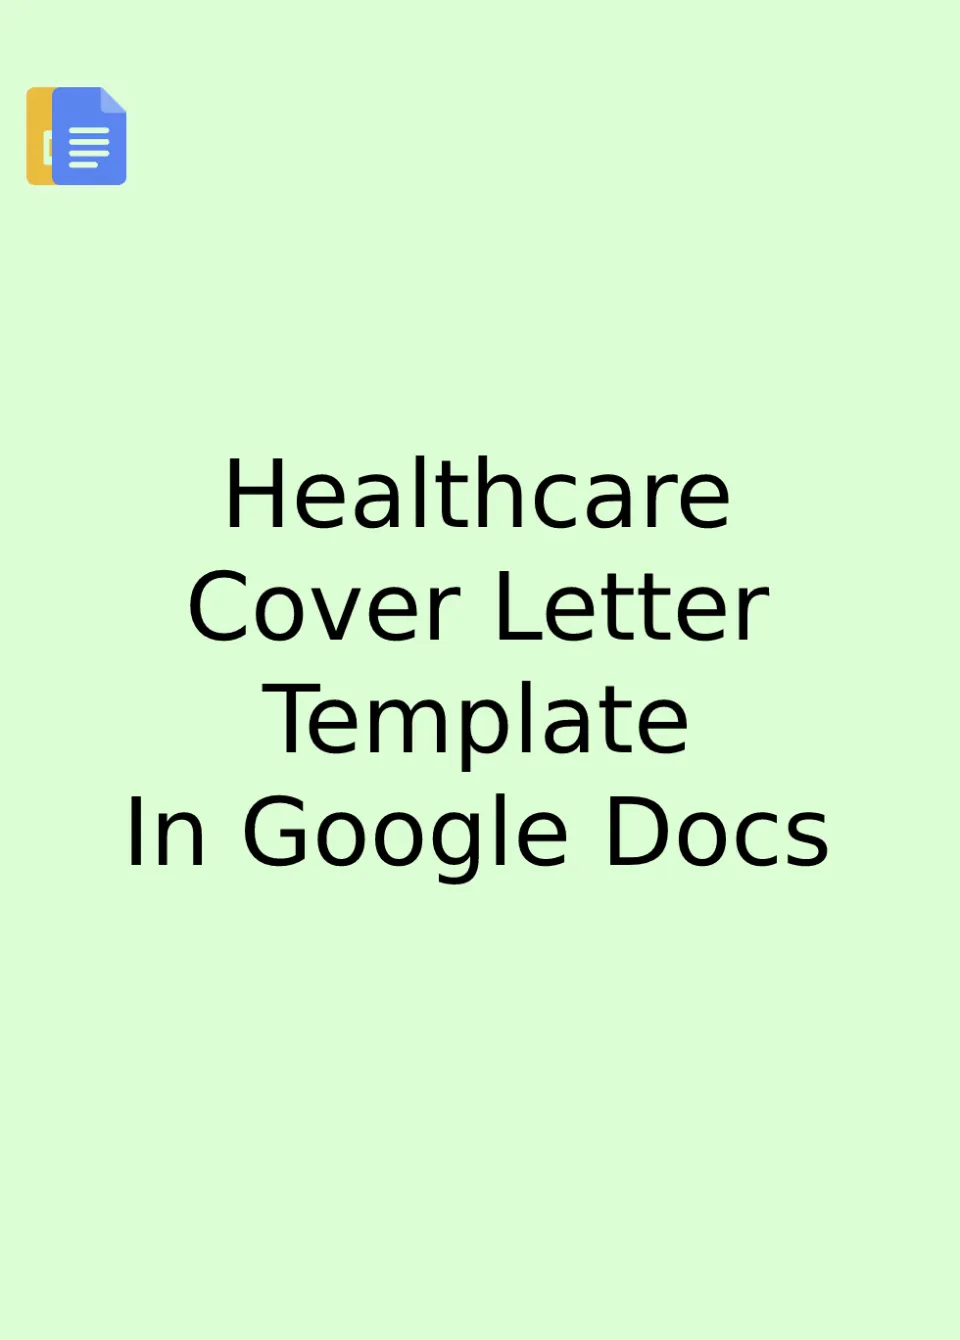 Healthcare Cover Letter Template Google Docs